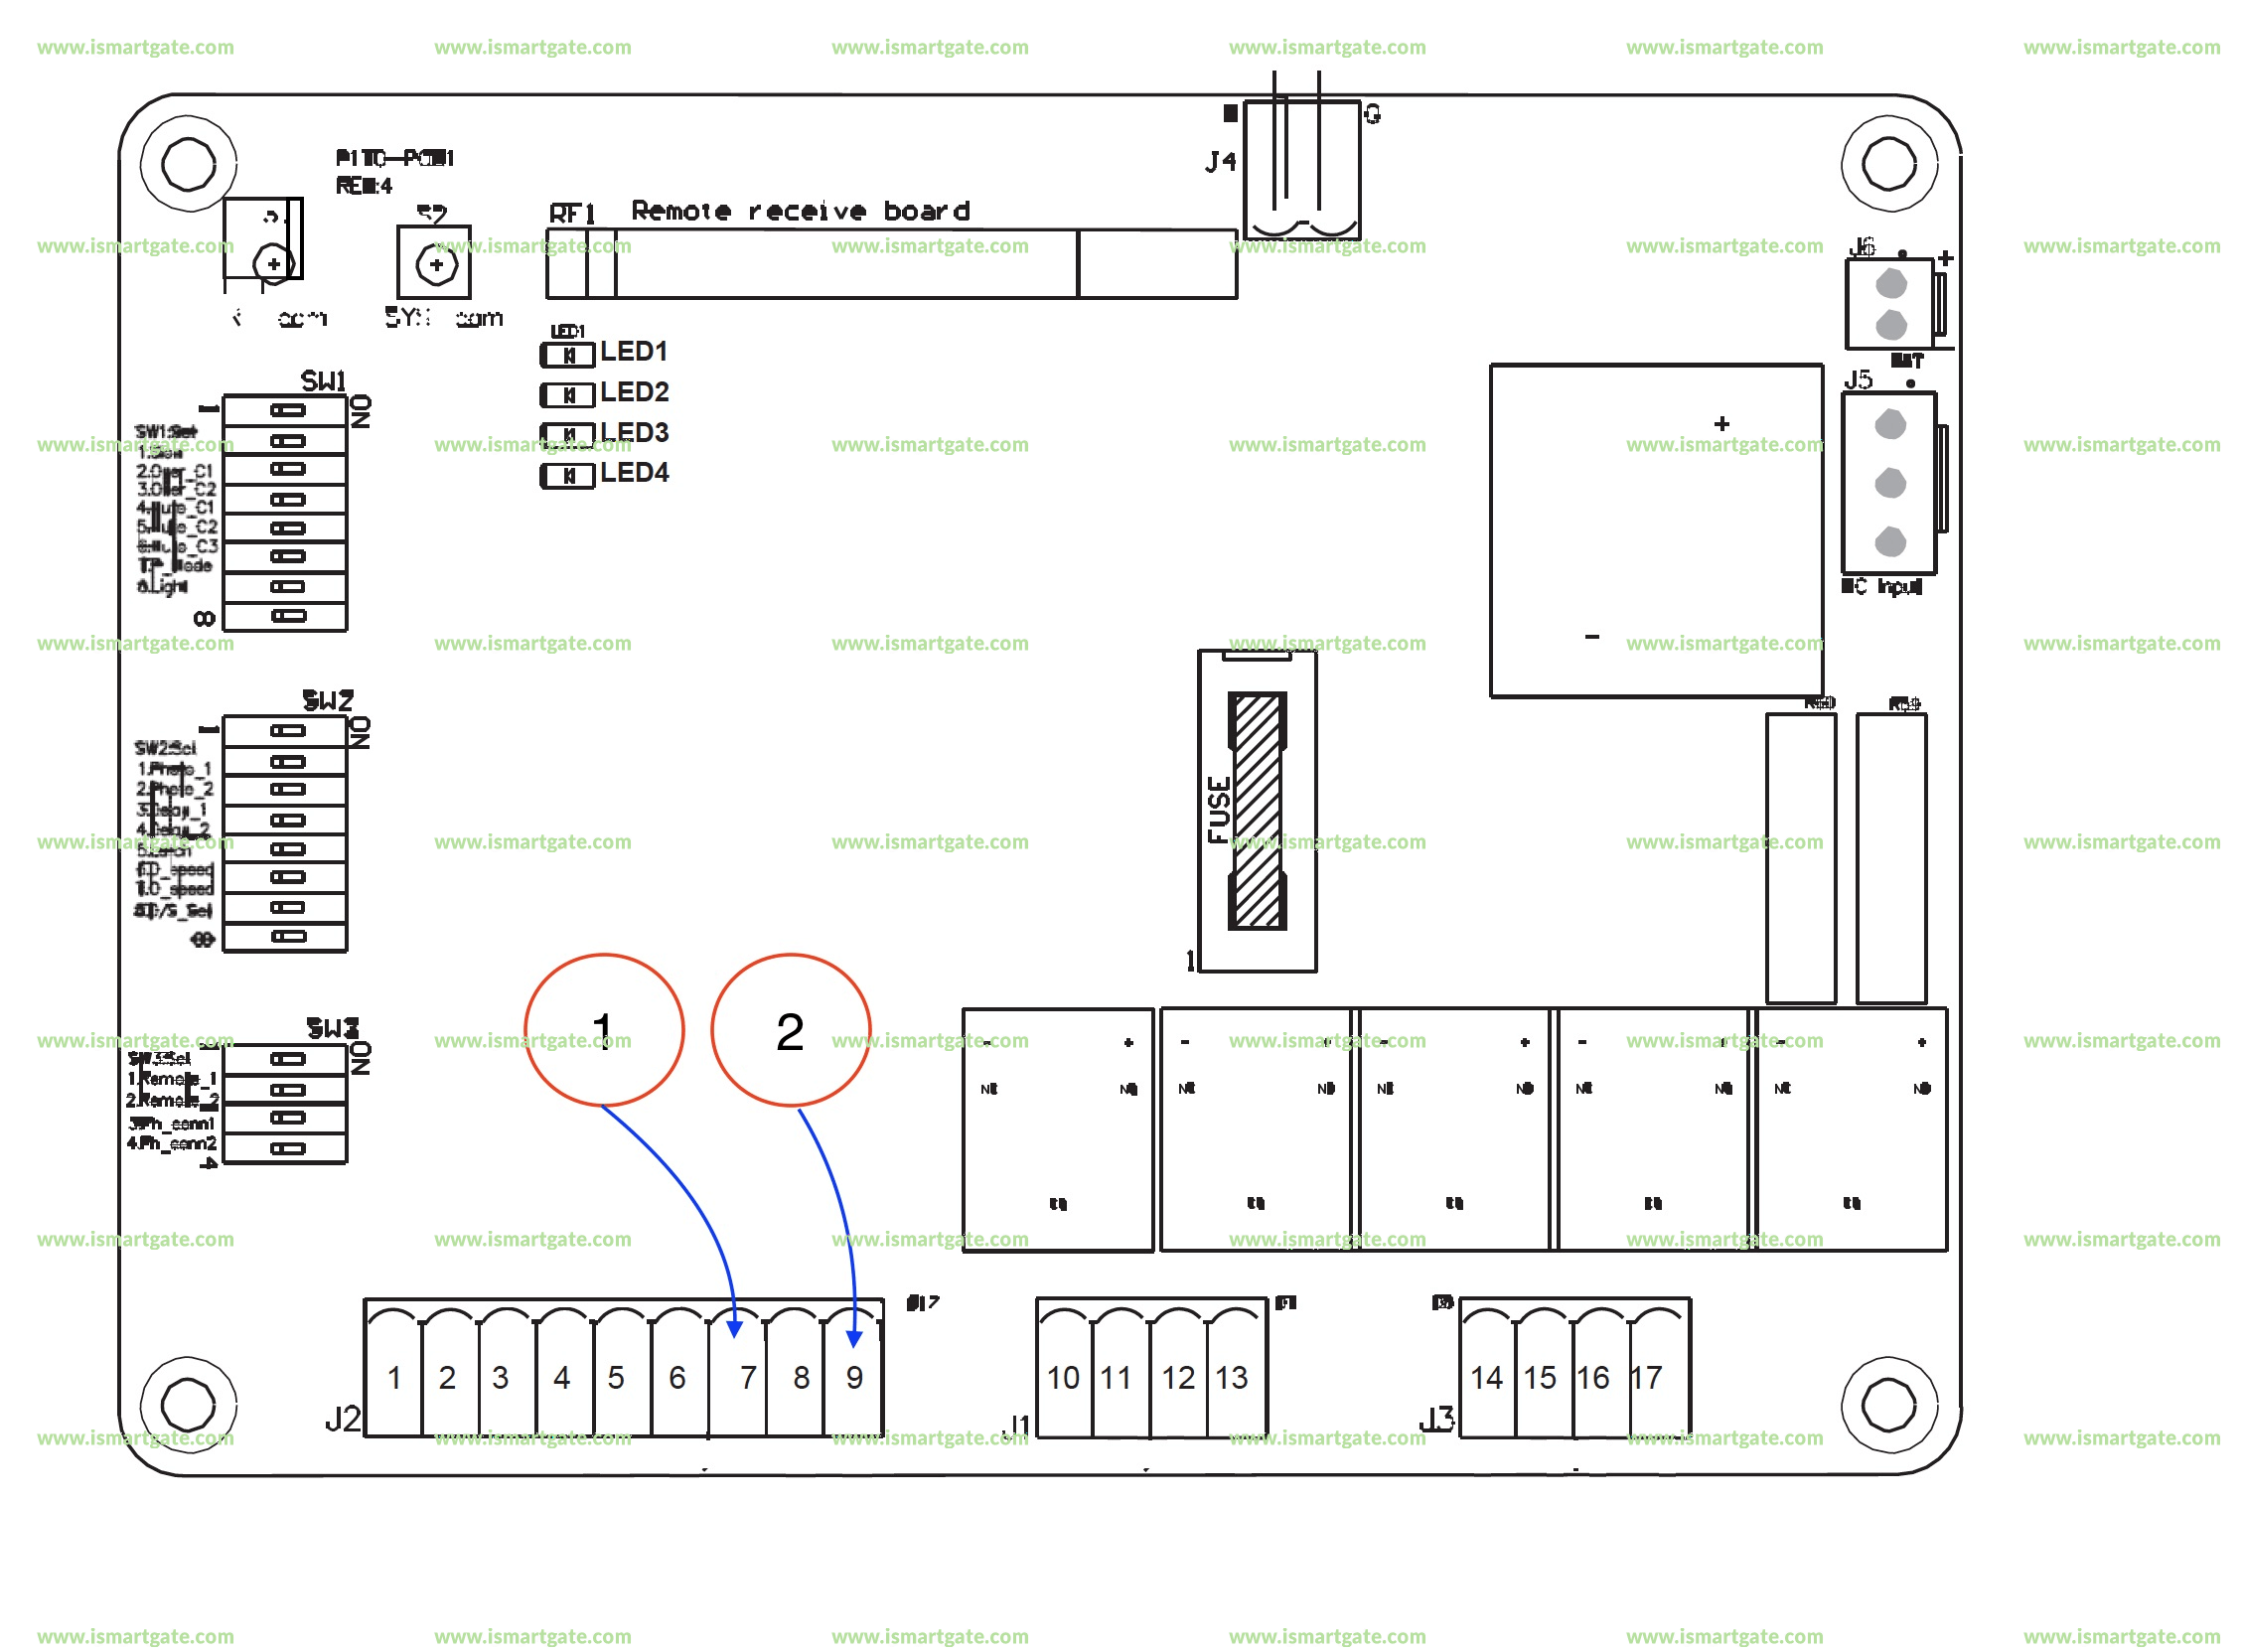 Wiring diagram for HBopeners Easyswing